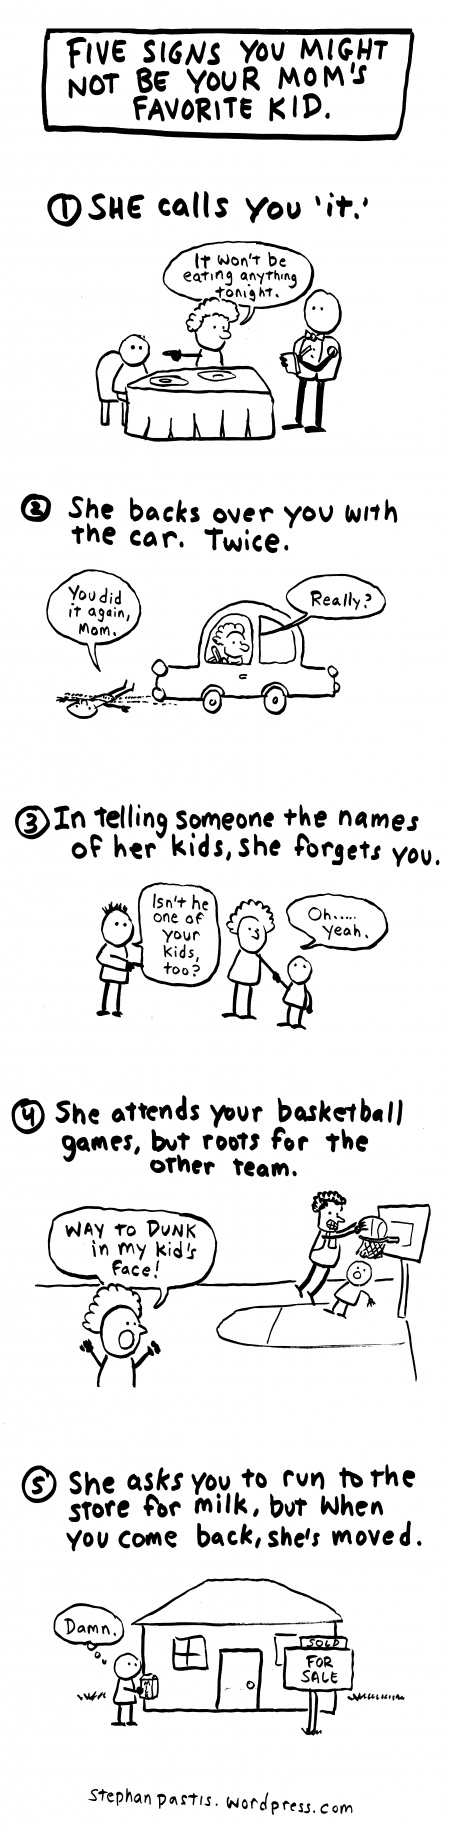 Five Signs You May Not Be Your Moms Favorite Kid